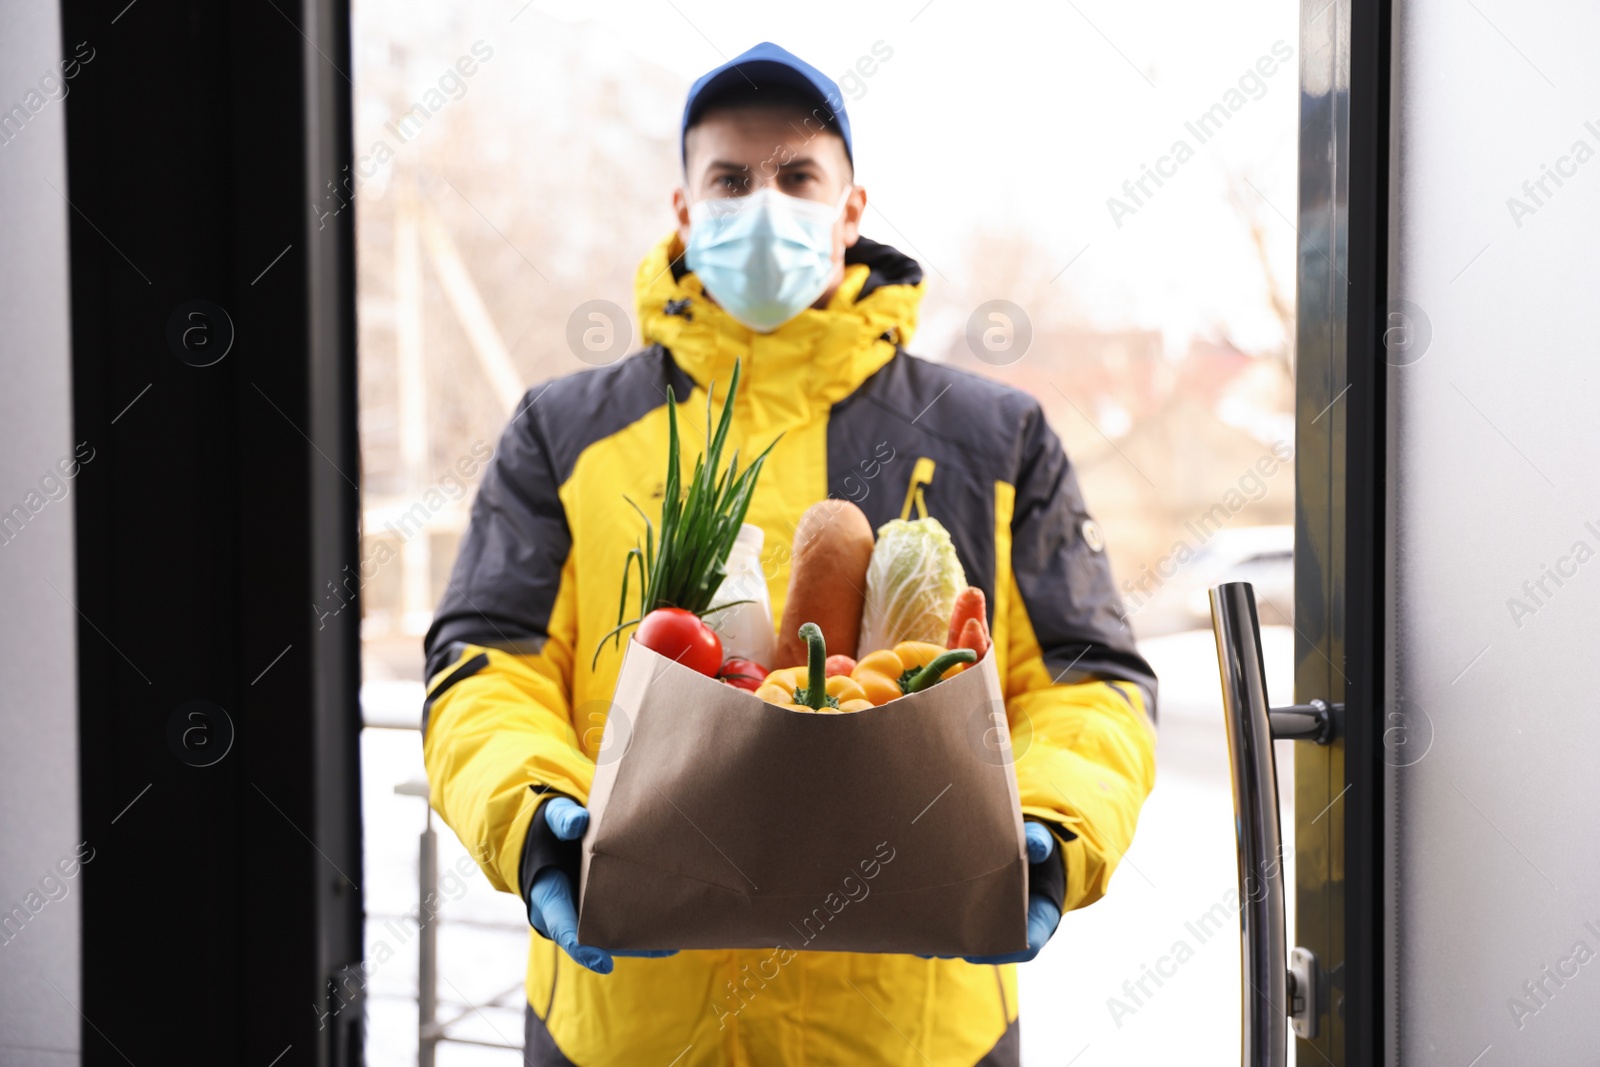 Photo of Courier in medical mask holding paper bag with groceries at doorway. Delivery service during quarantine due to Covid-19 outbreak